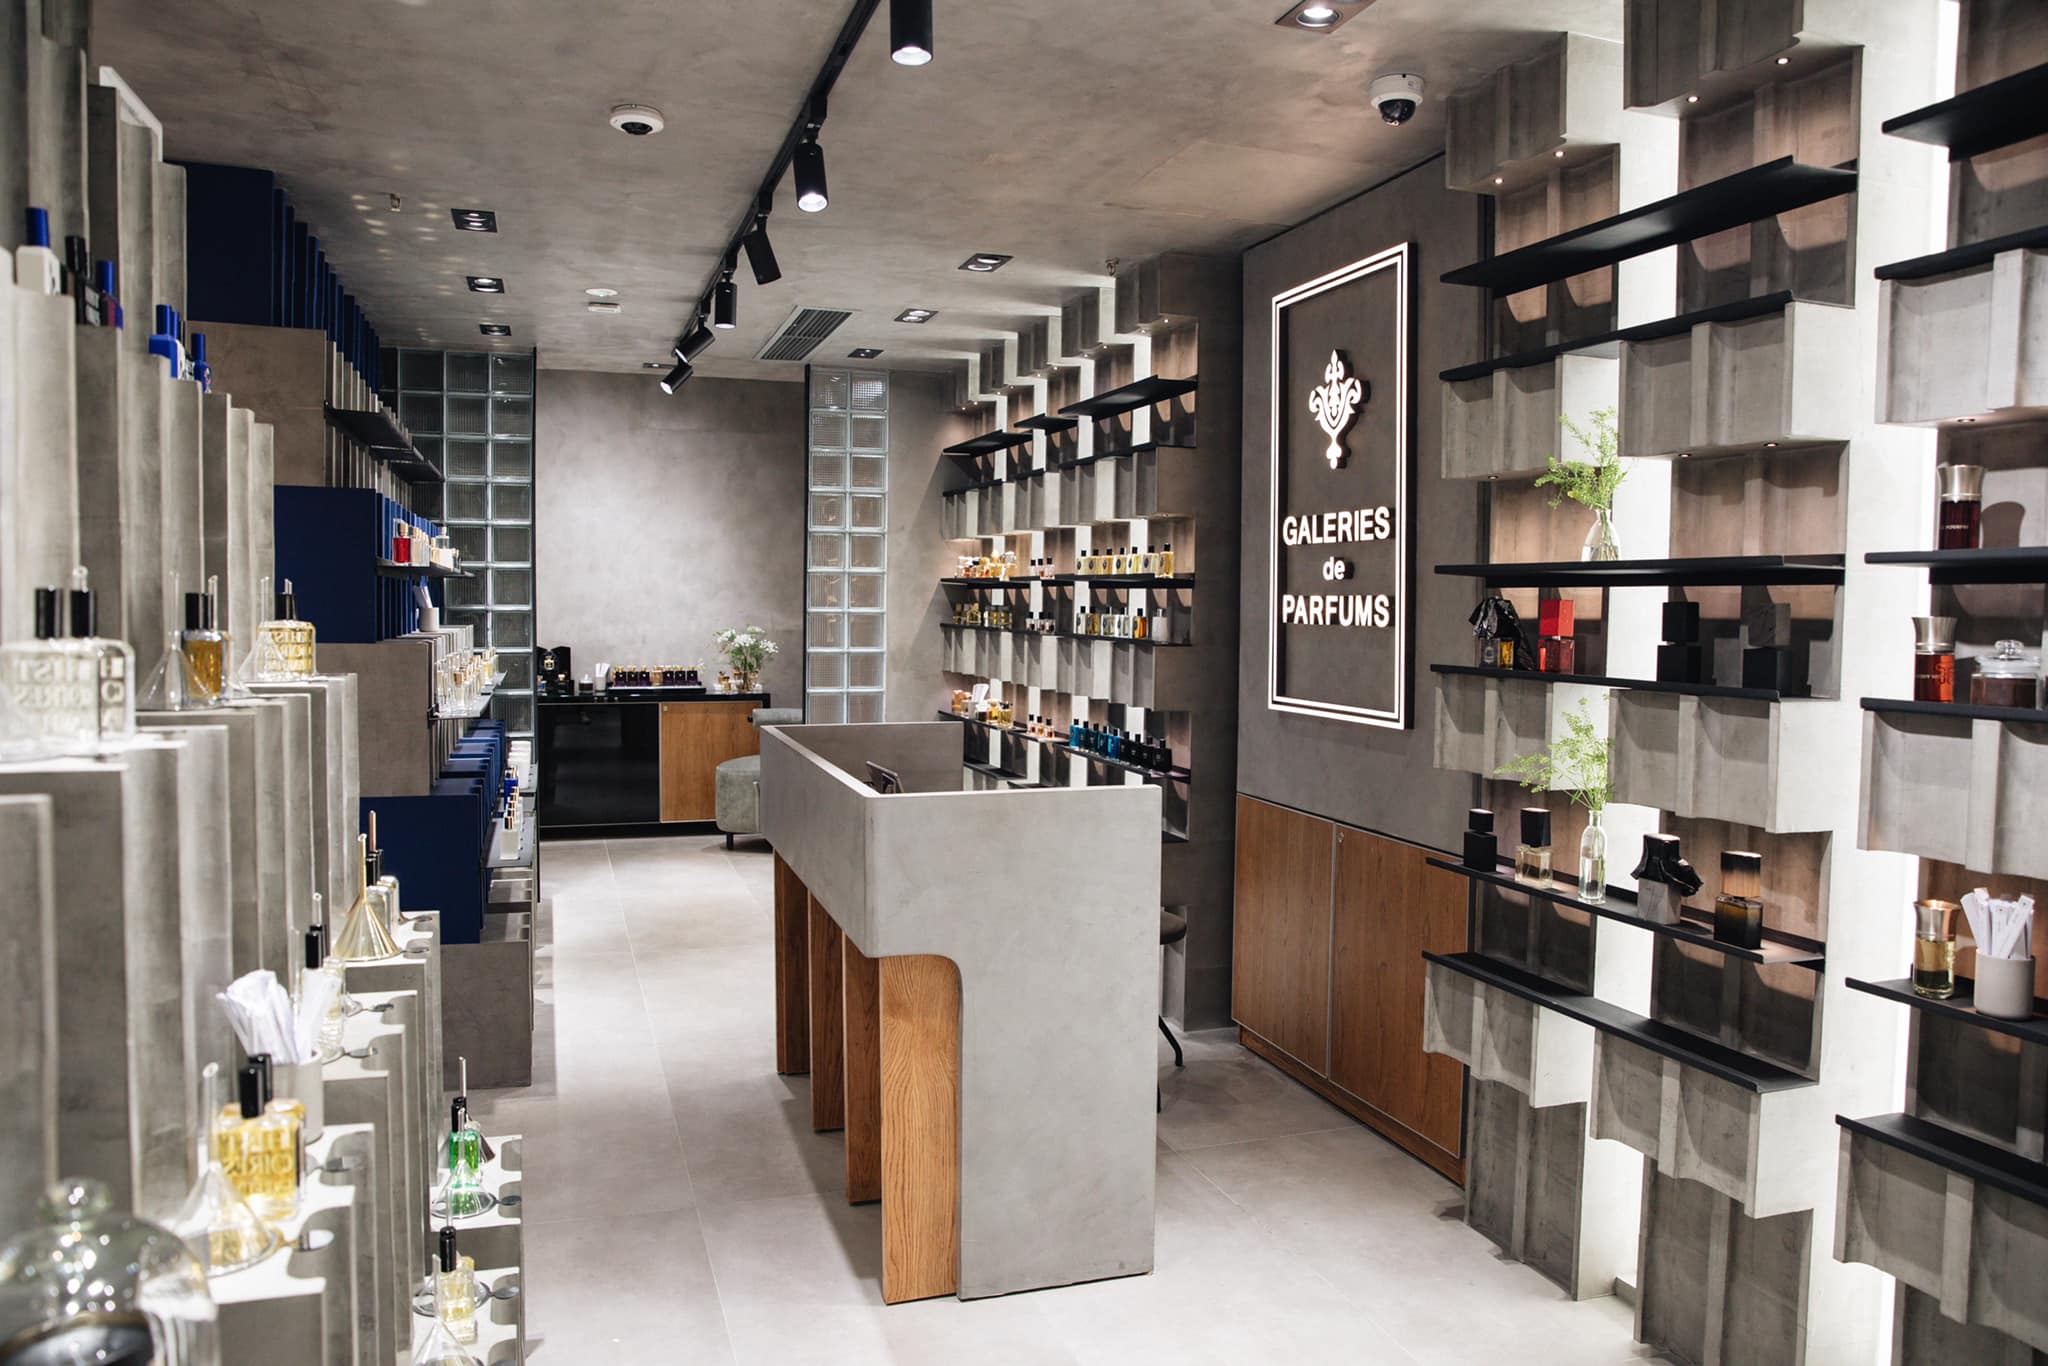 New space of ViinRiic Galeries De Parfums to display niche perfumes at Vincom Dong Khoi